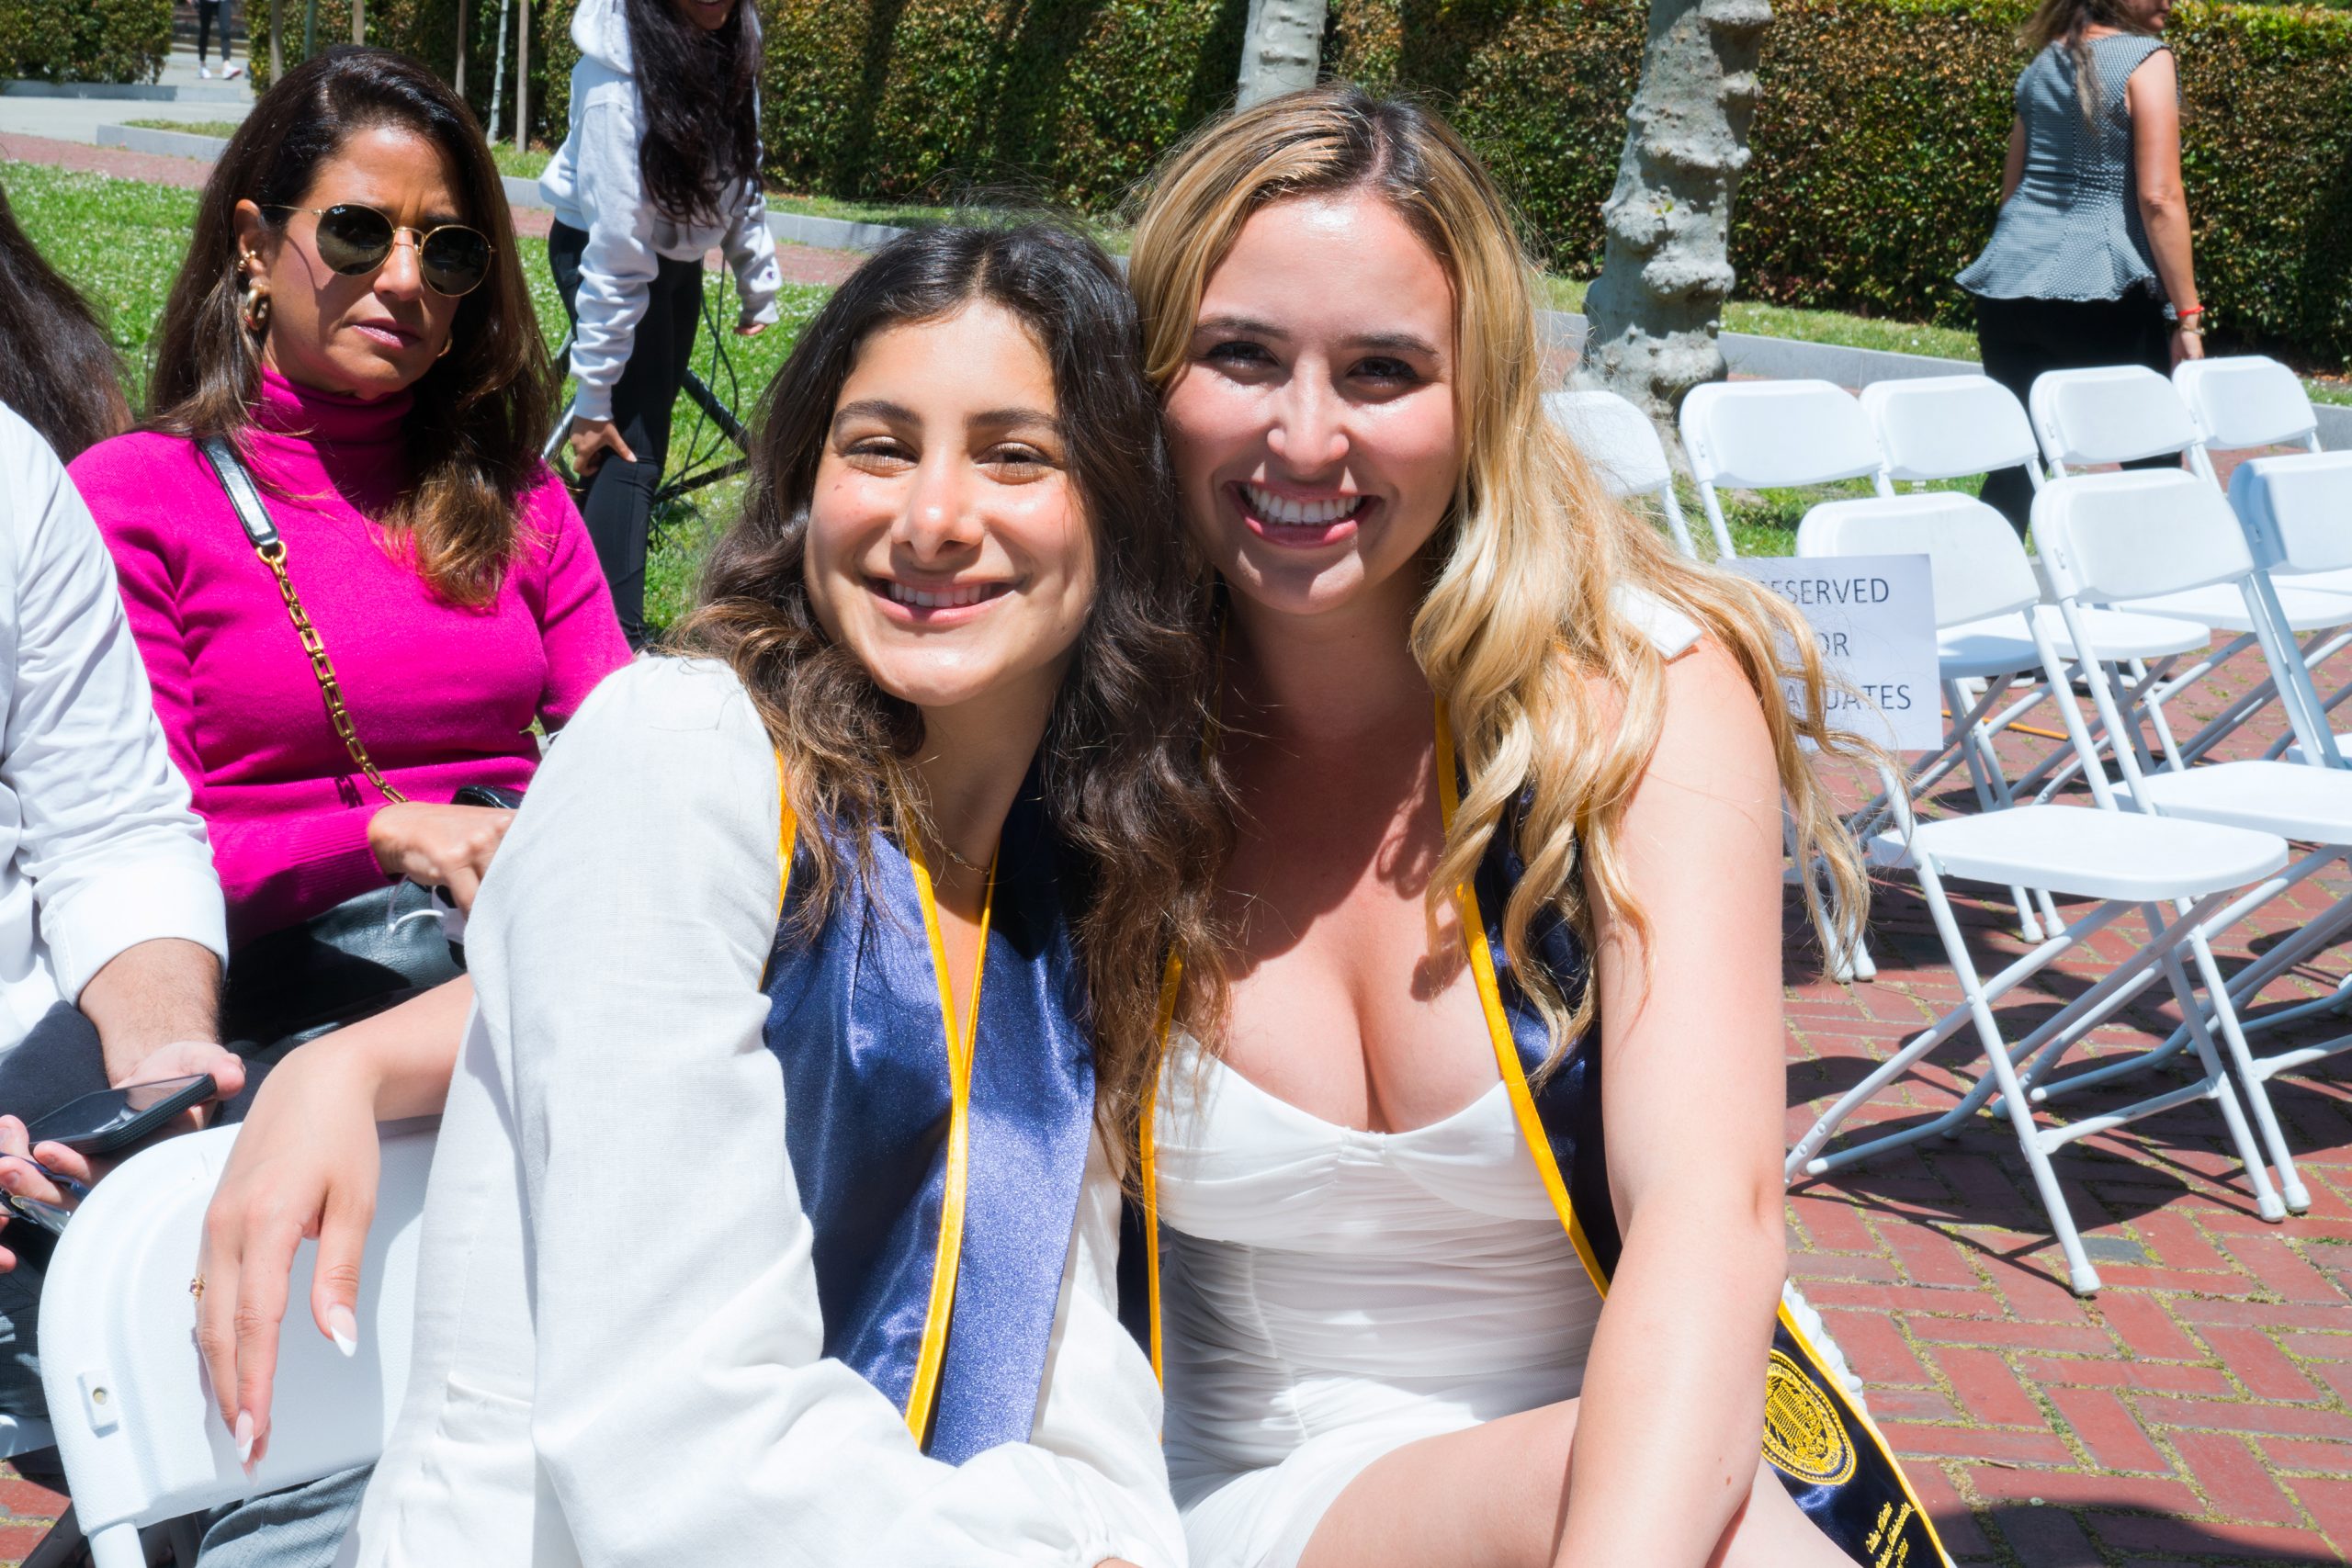  Friends and colleagues, Careena El-Khatib (left) and Celine Wheritt (right), smile for a picture in their seats as they wait for the ceremony to begin. 